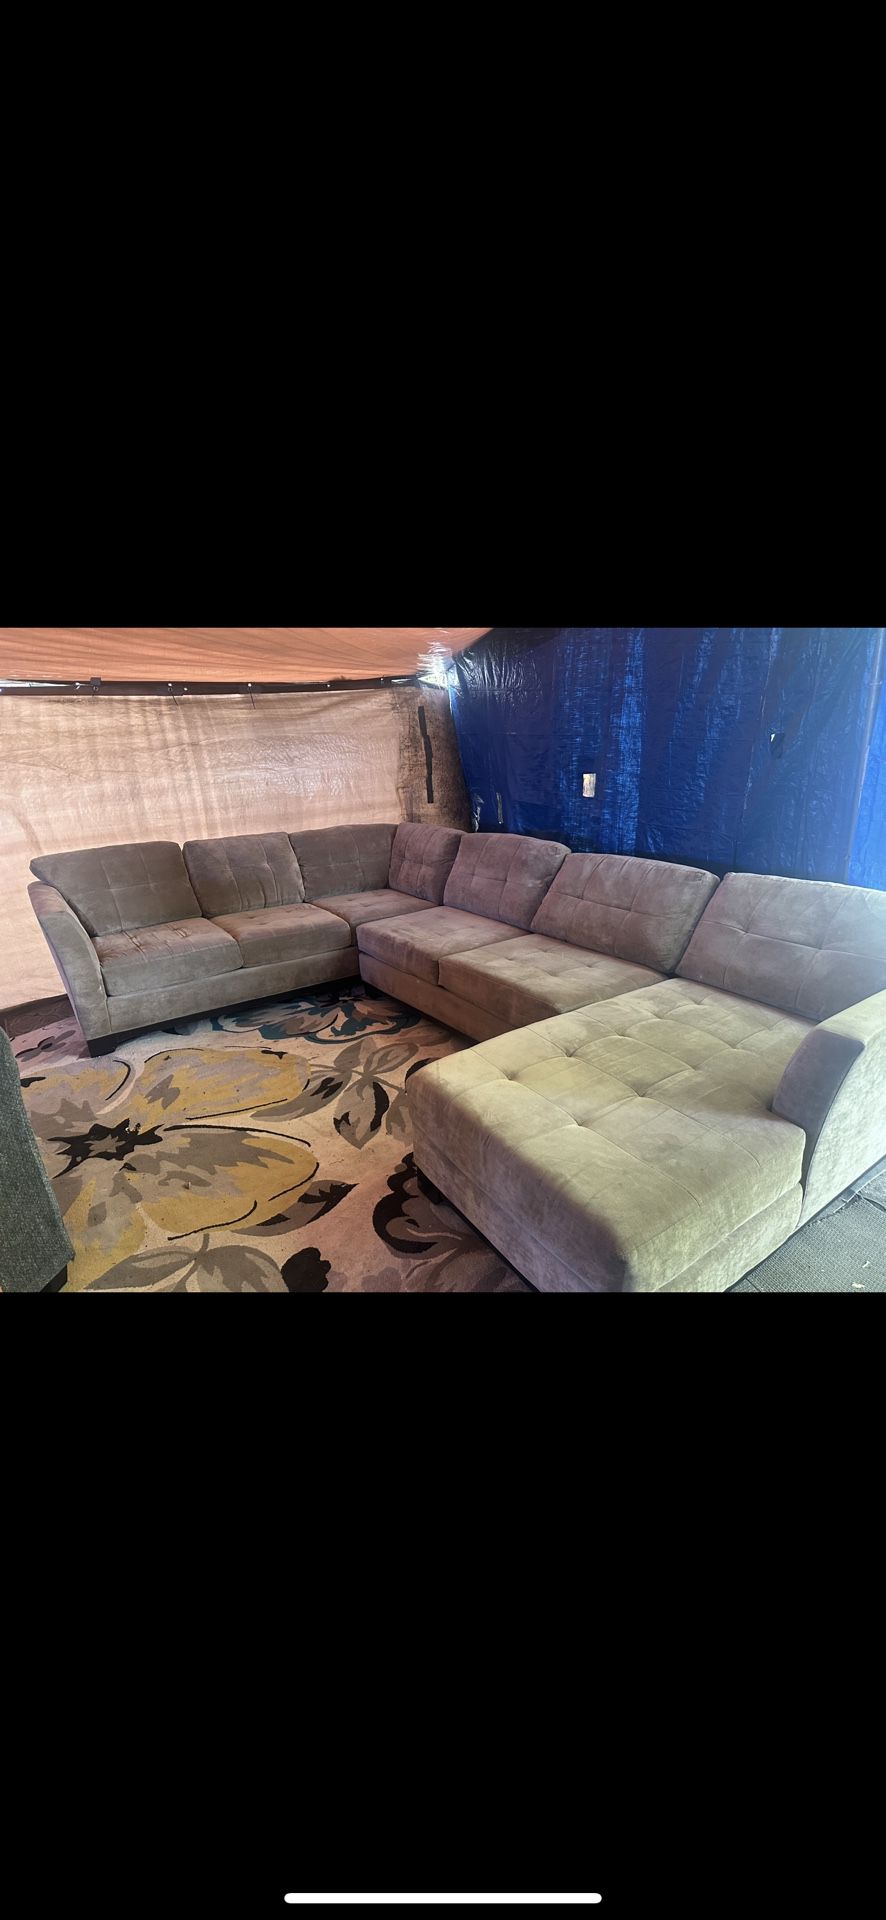  sectional couch With Bed good condition clean we sell all the time delivery extra 40 local